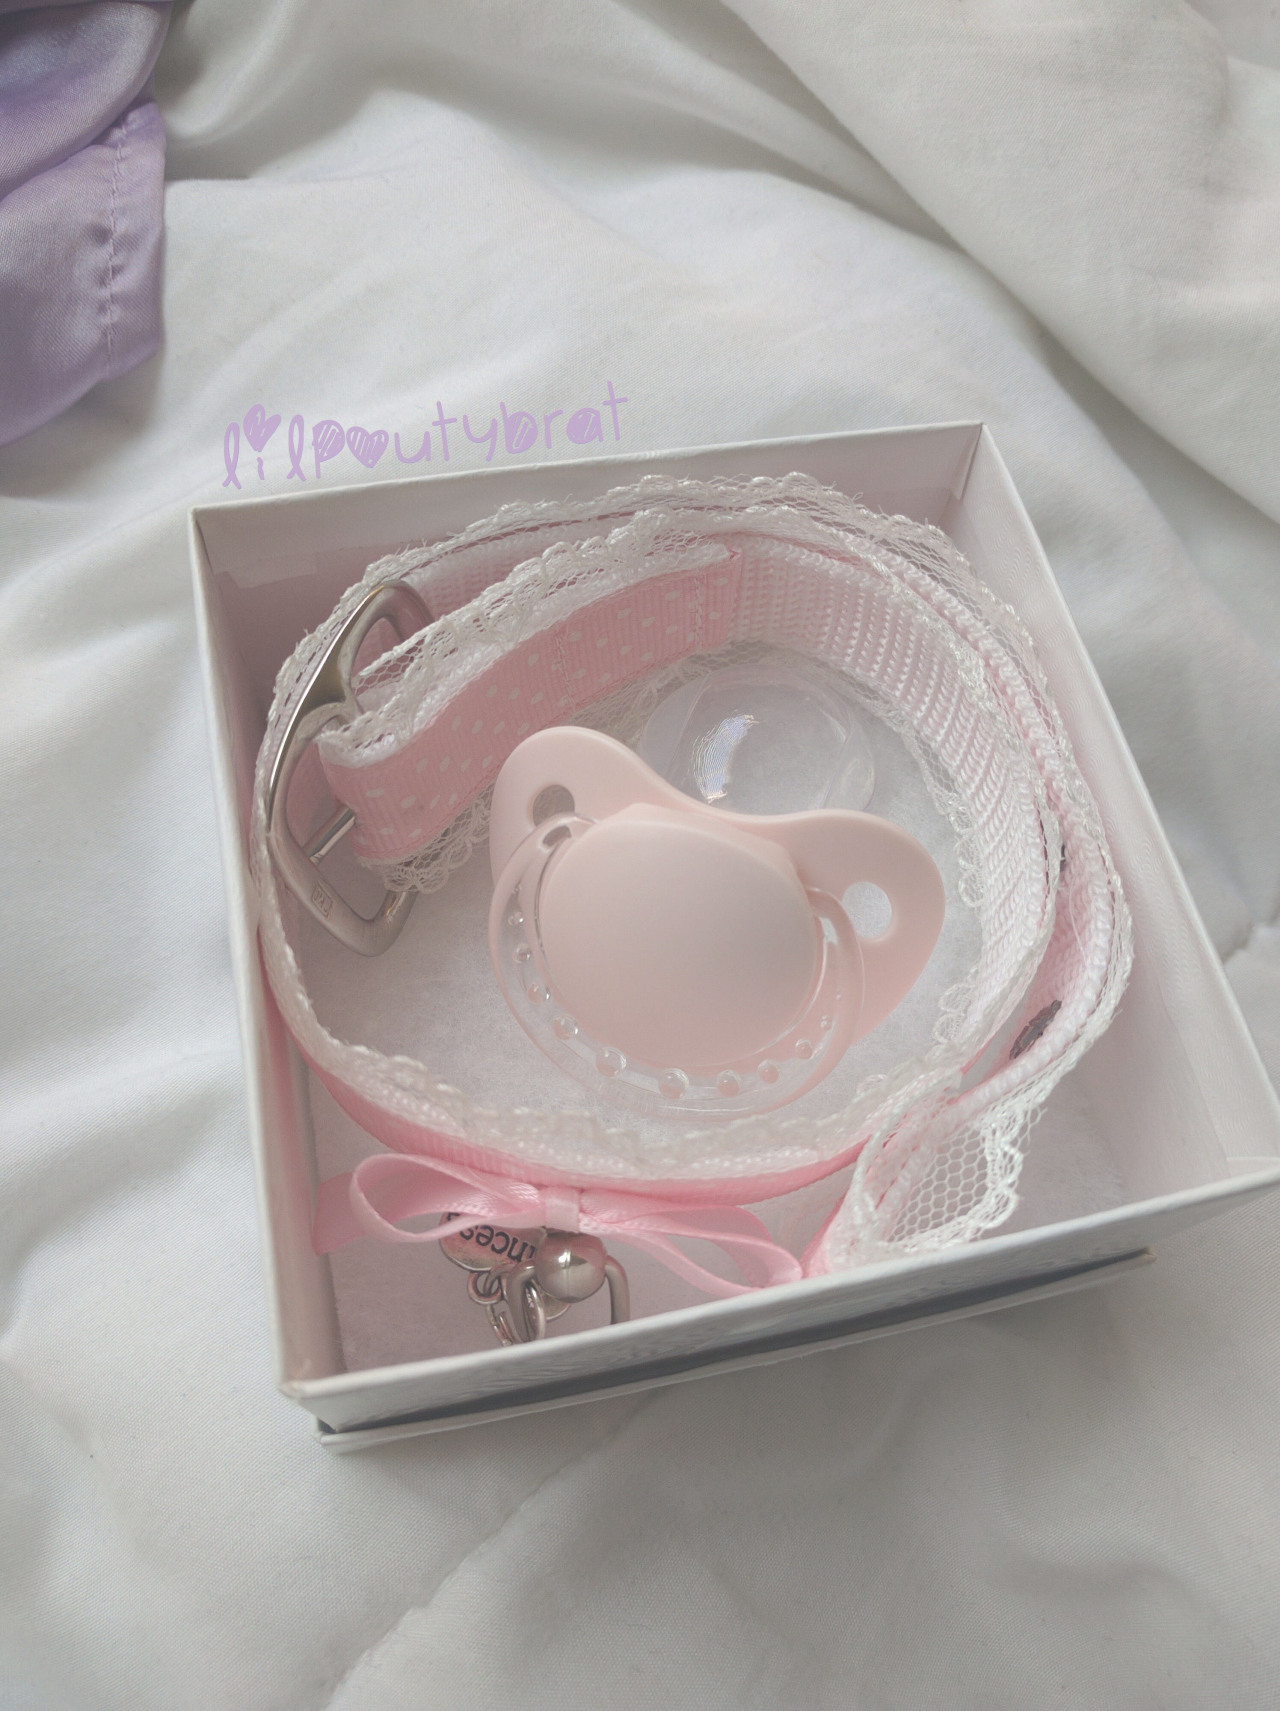 lilpoutybrat:  my binky and my collar stay in this little box when I’m away 💗